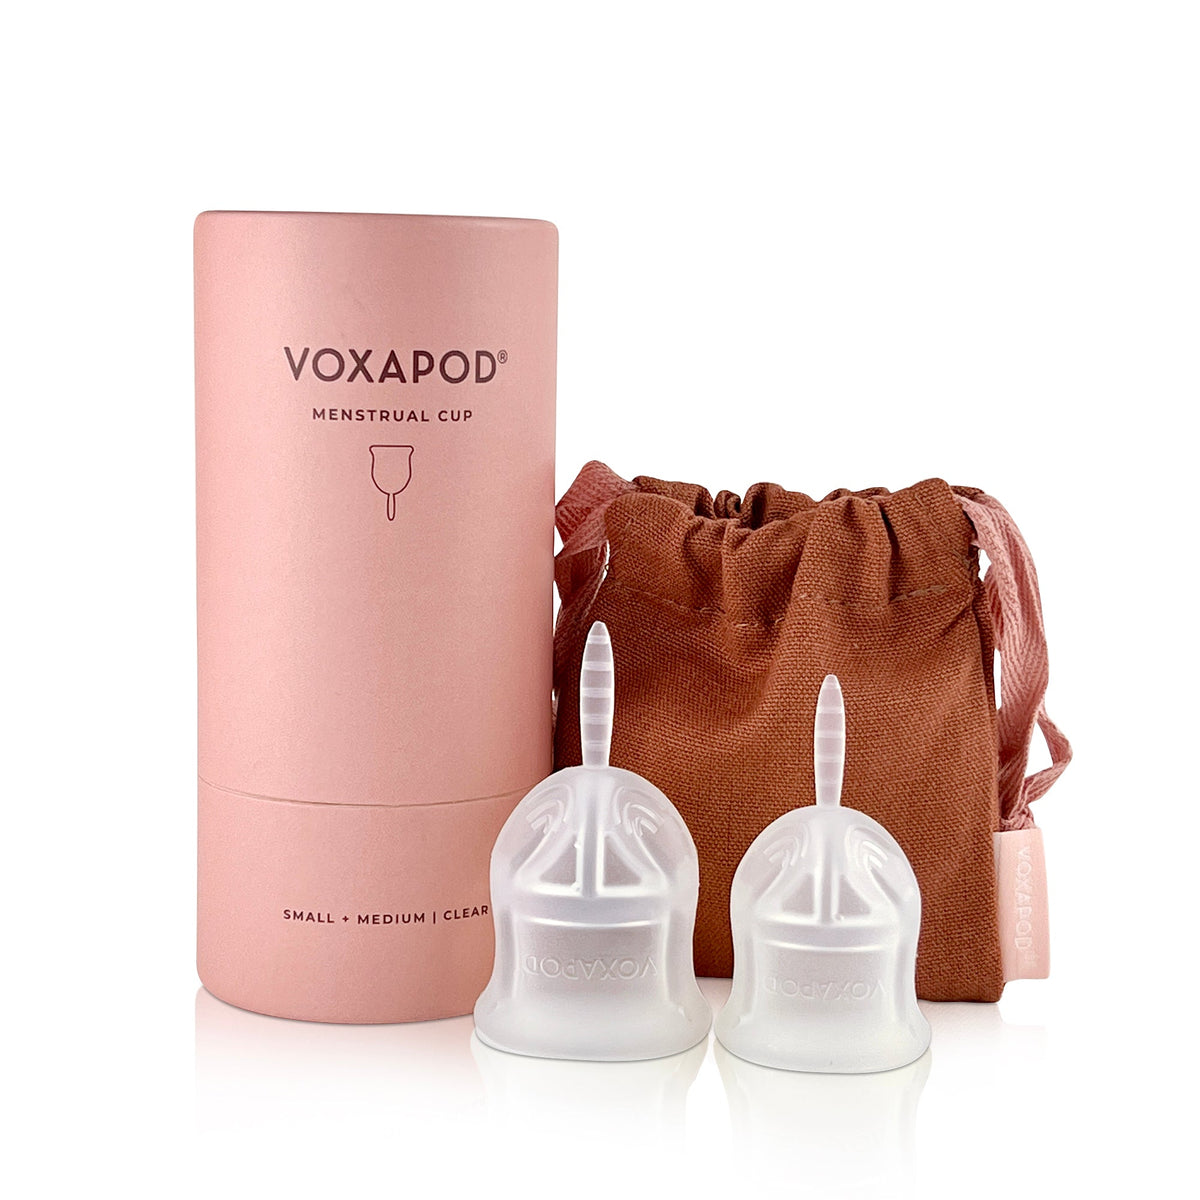 VOXAPOD Menstrual Cup Duo (2 Cups) - VOXAPOD® soft reusable medical grade silicone fda approved period cup